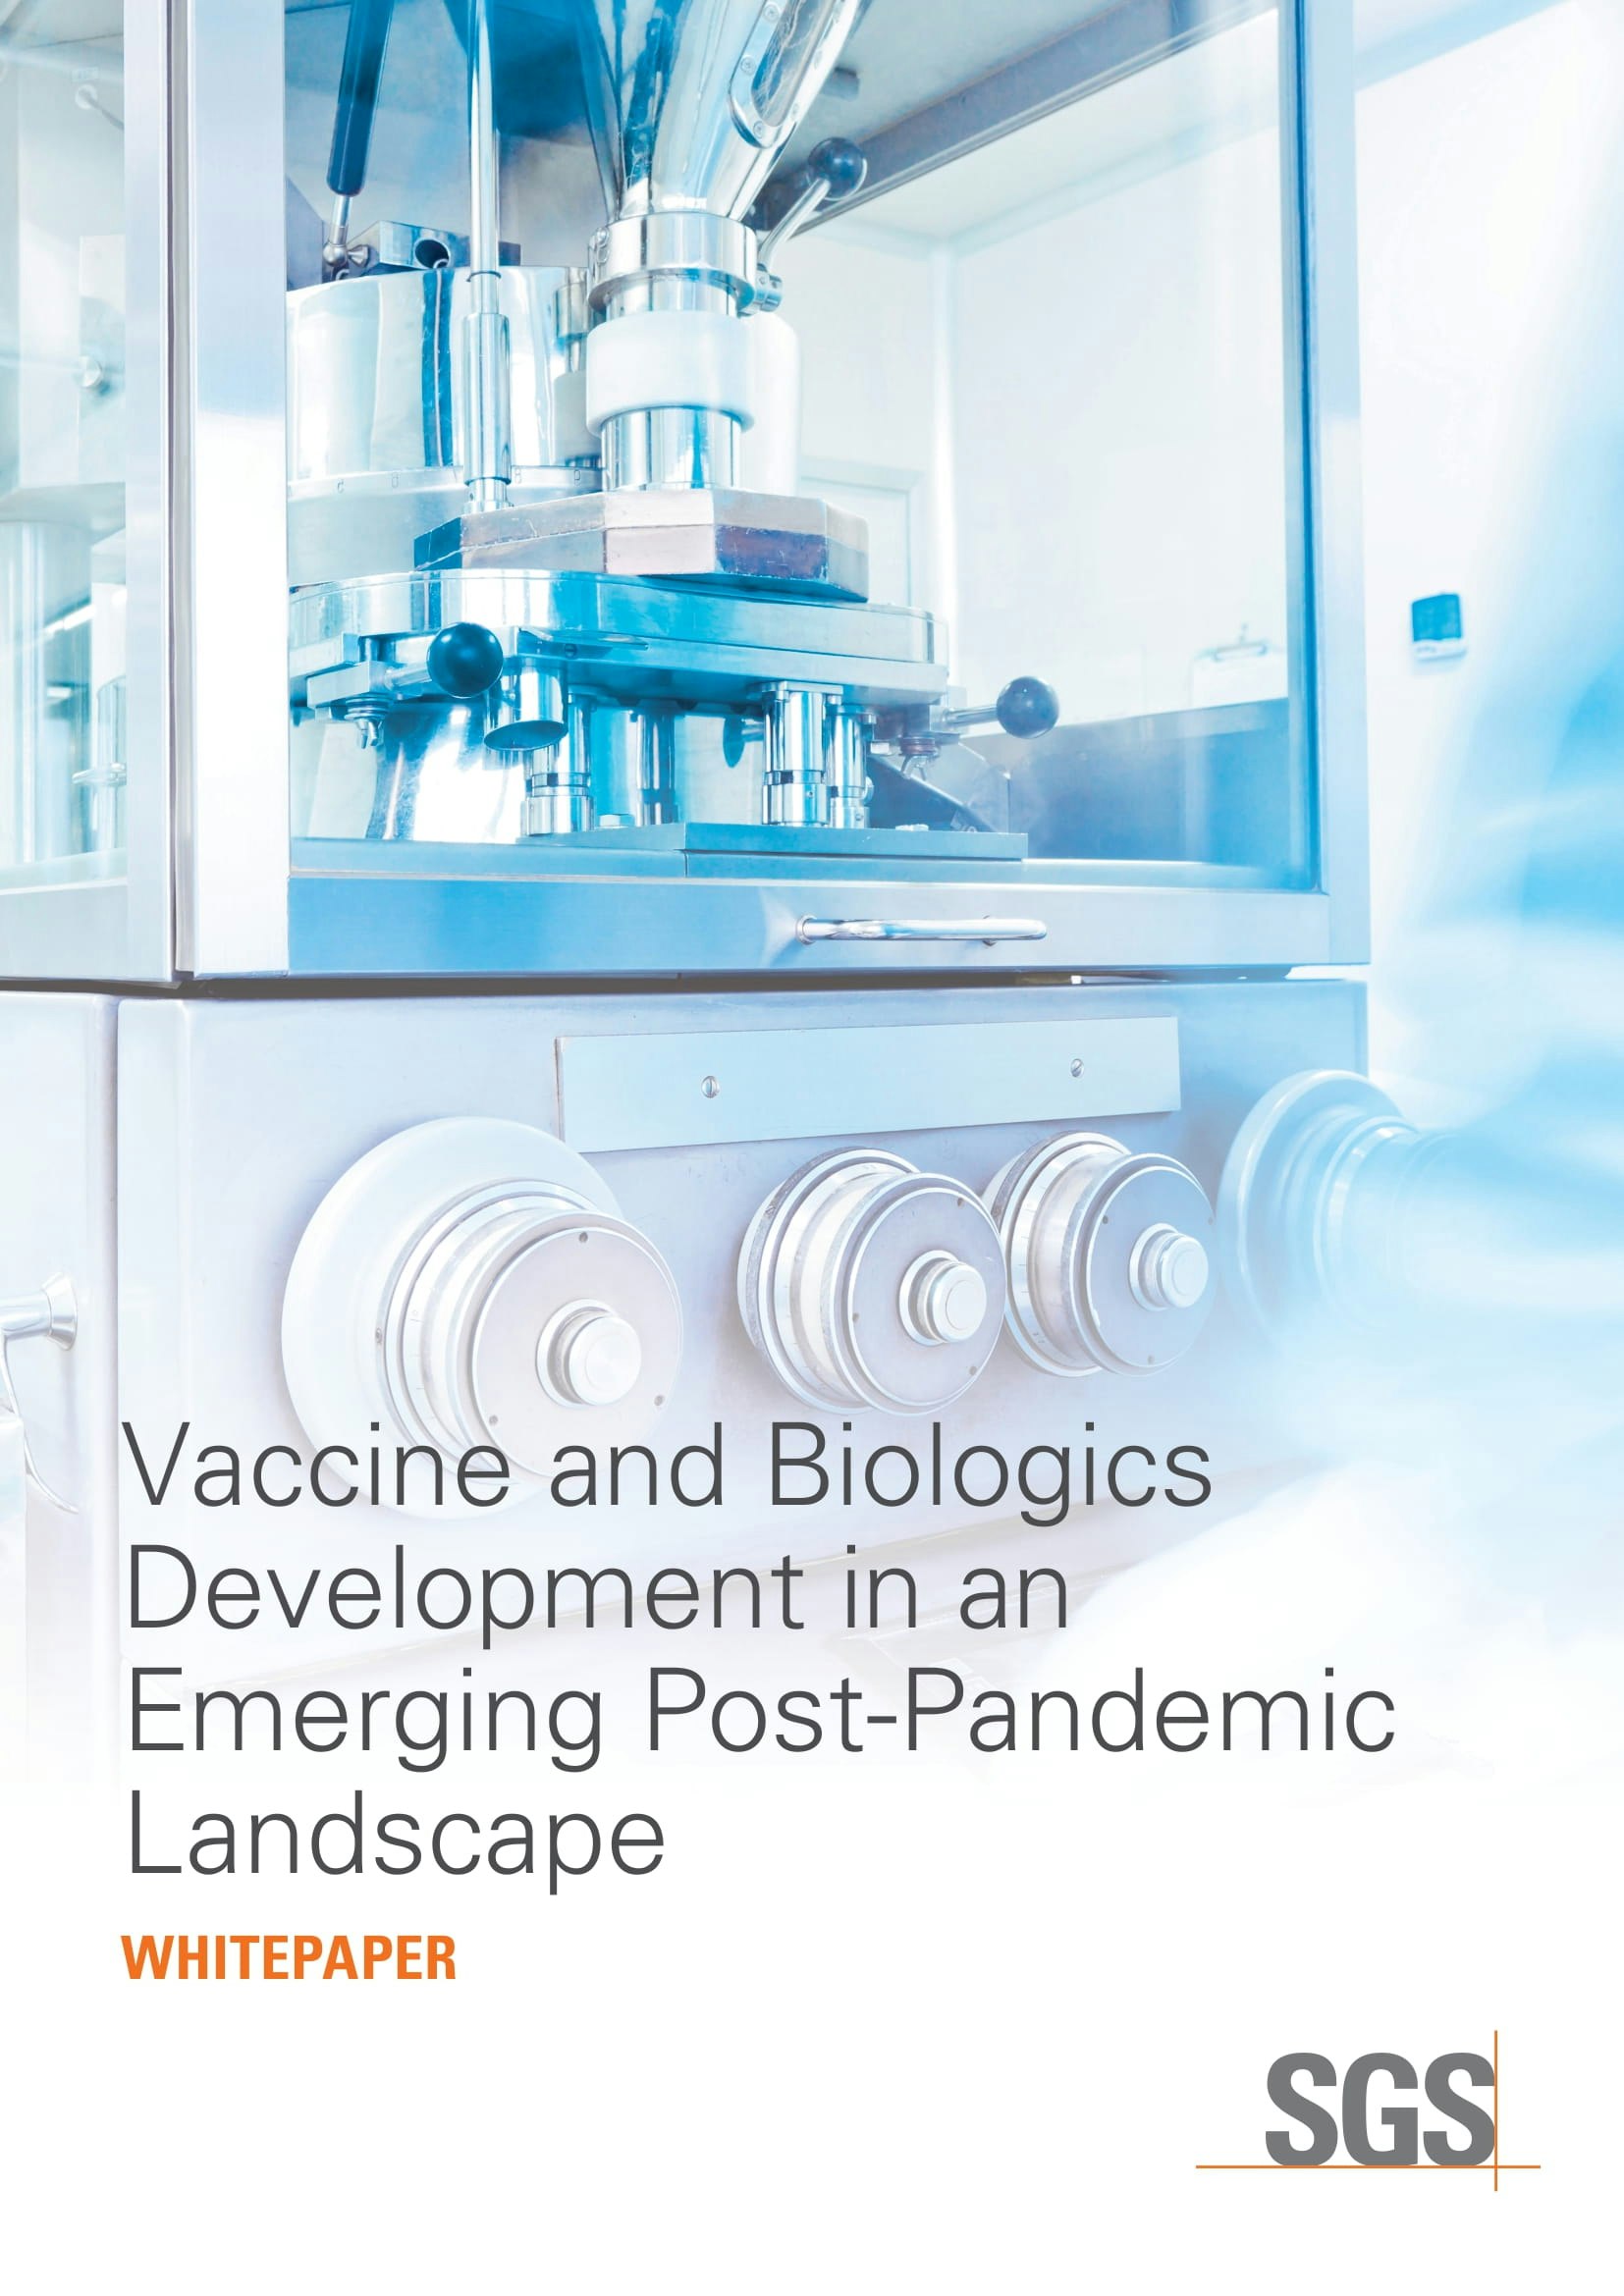 Vaccine and Biologics Development in an Emerging Post-Pandemic Landscape